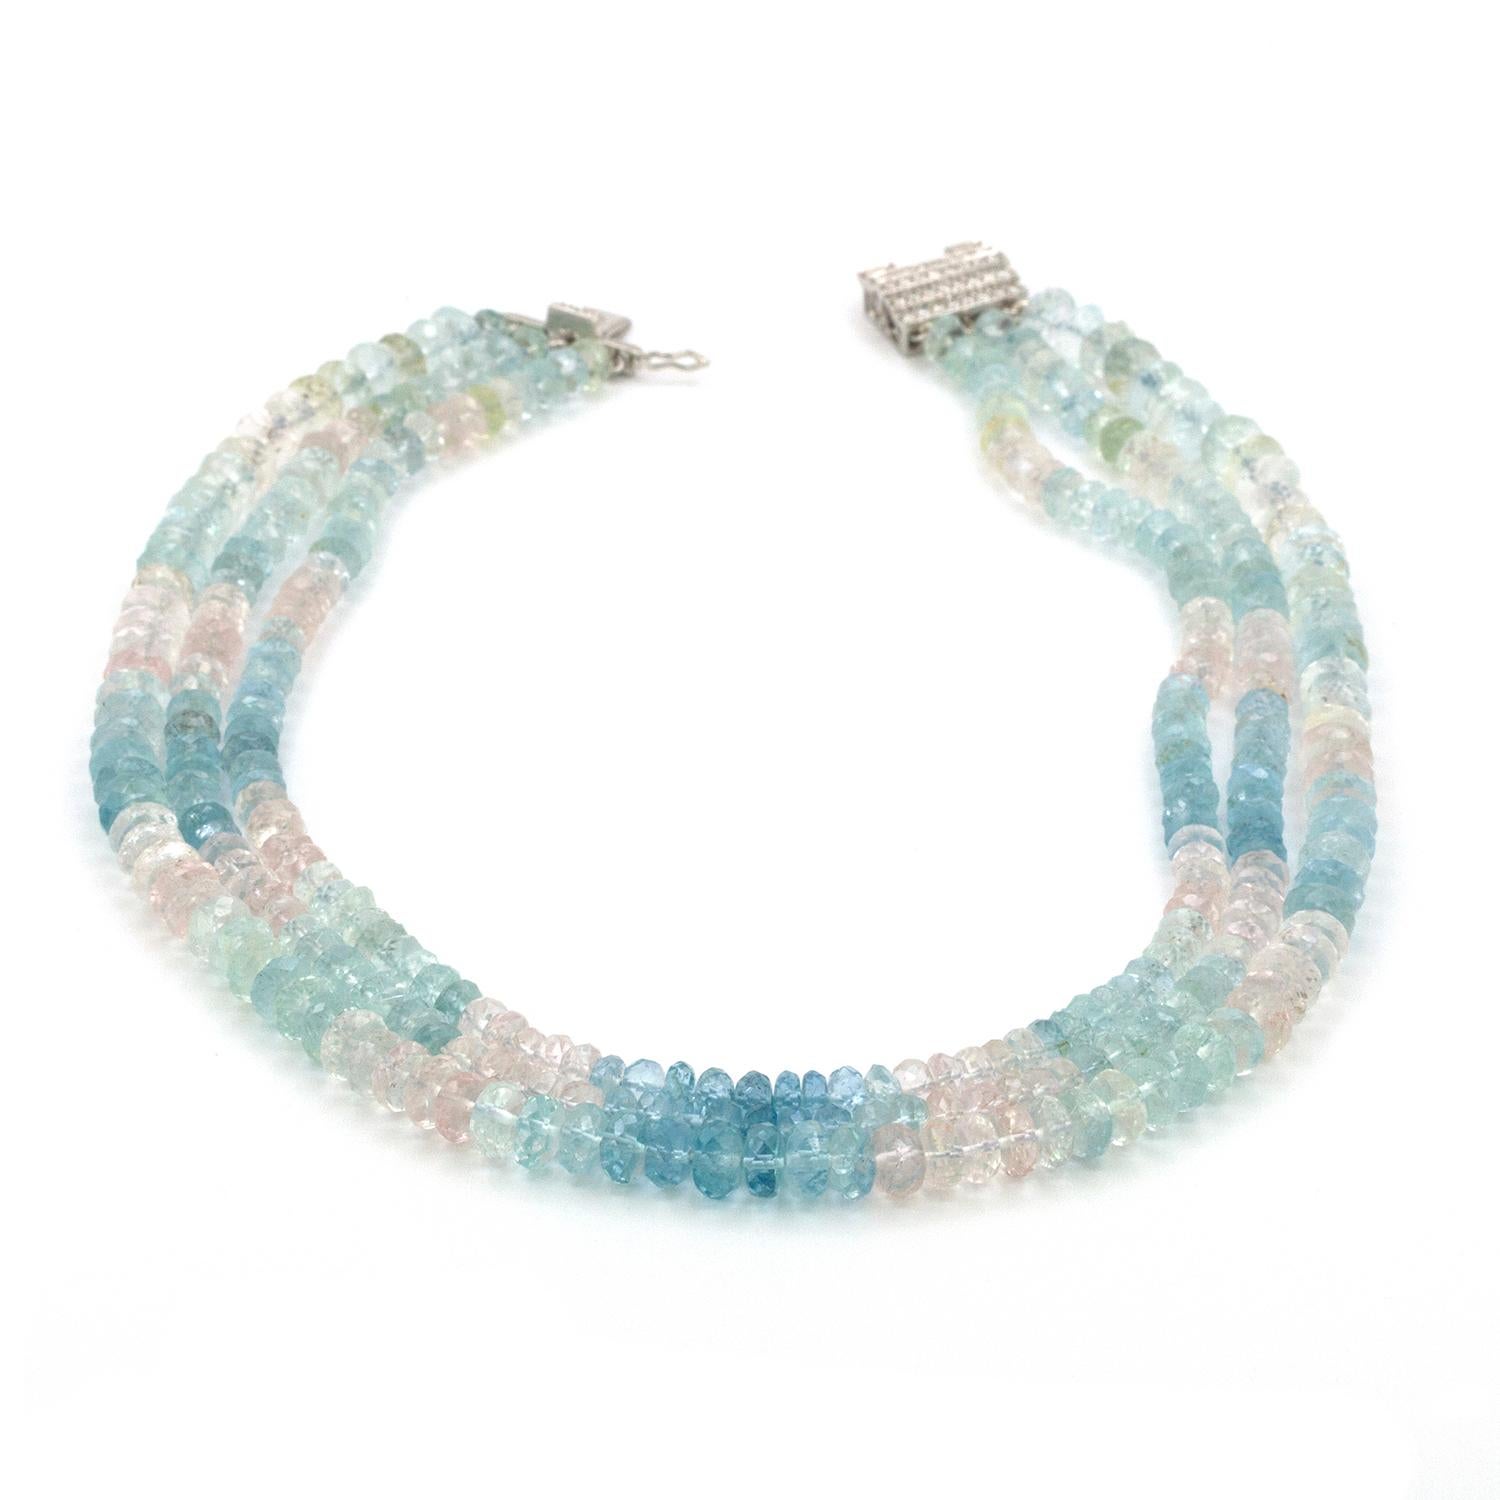 A stunning, 300 carat, Aquamarine and Pink Topaz three strand necklace, that is comprised of 5.50 - 7.75 mm briolette cut Aquamarines and Pink Topaz. They are connected with a 18k white gold diamond clasp that contains 40 rbc diamonds that weigh